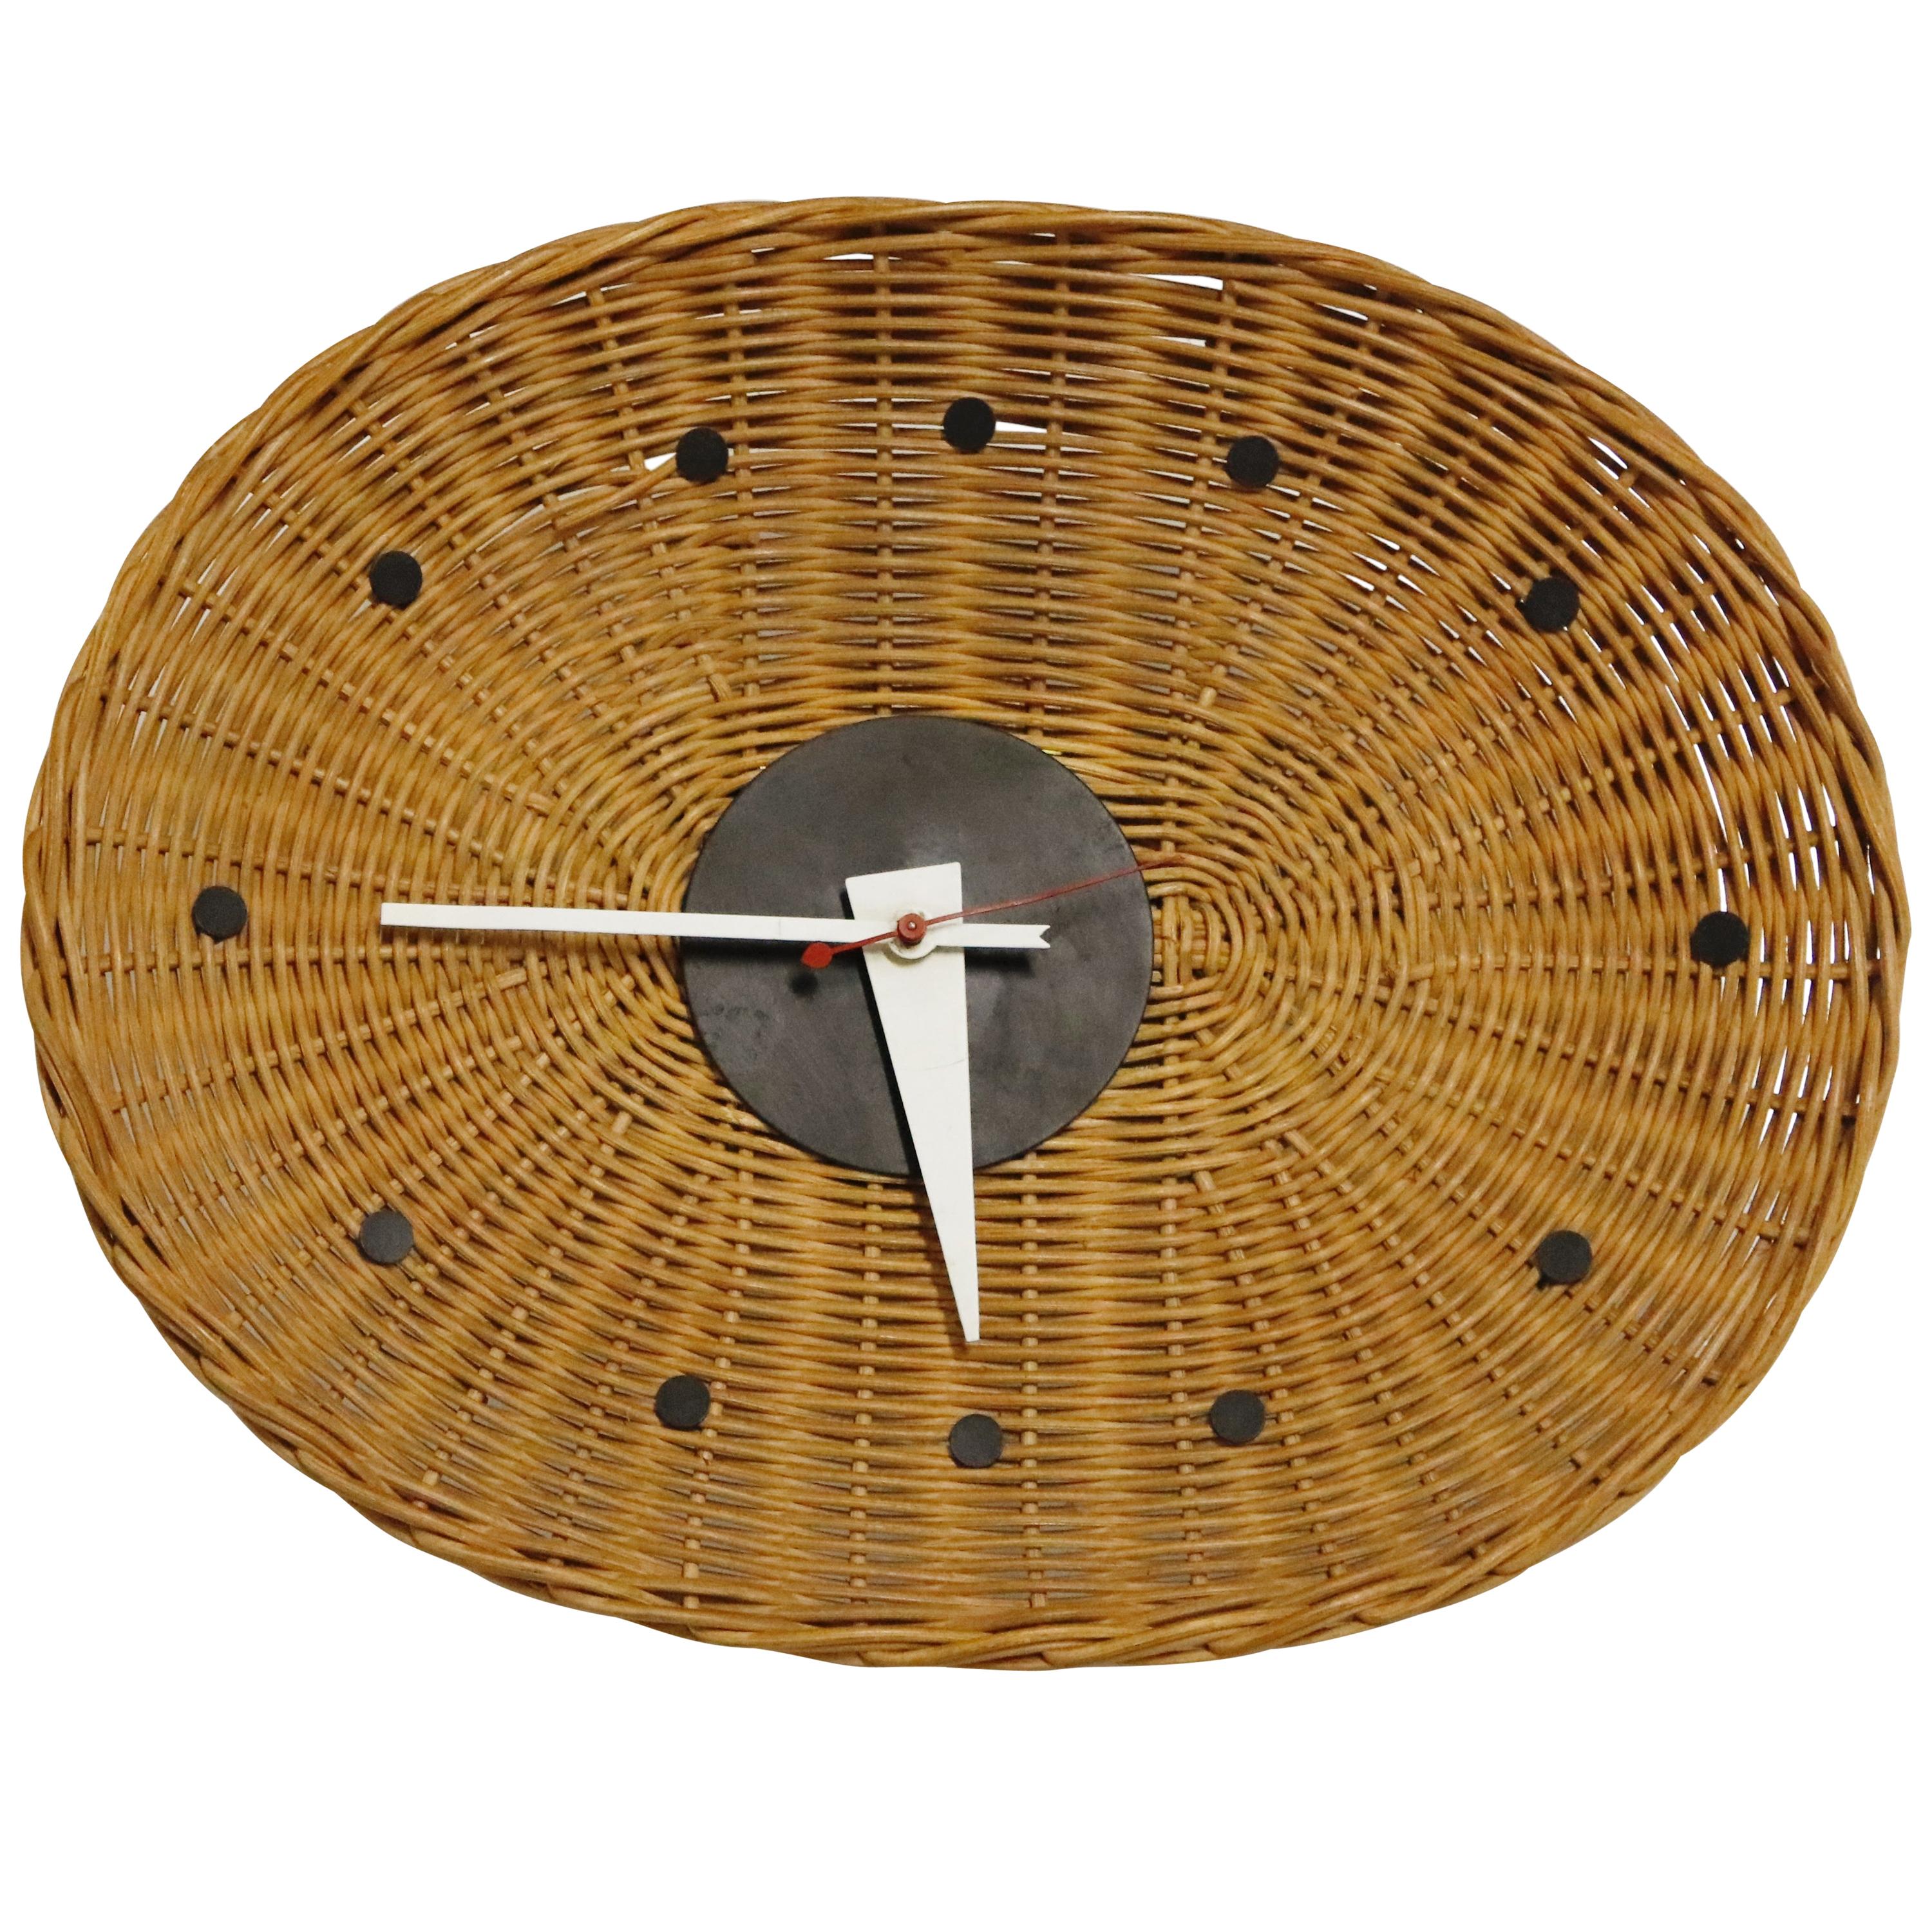 Original Oval Rattan 'Basket Clock' by George Nelson for Howard Miller, 1950s